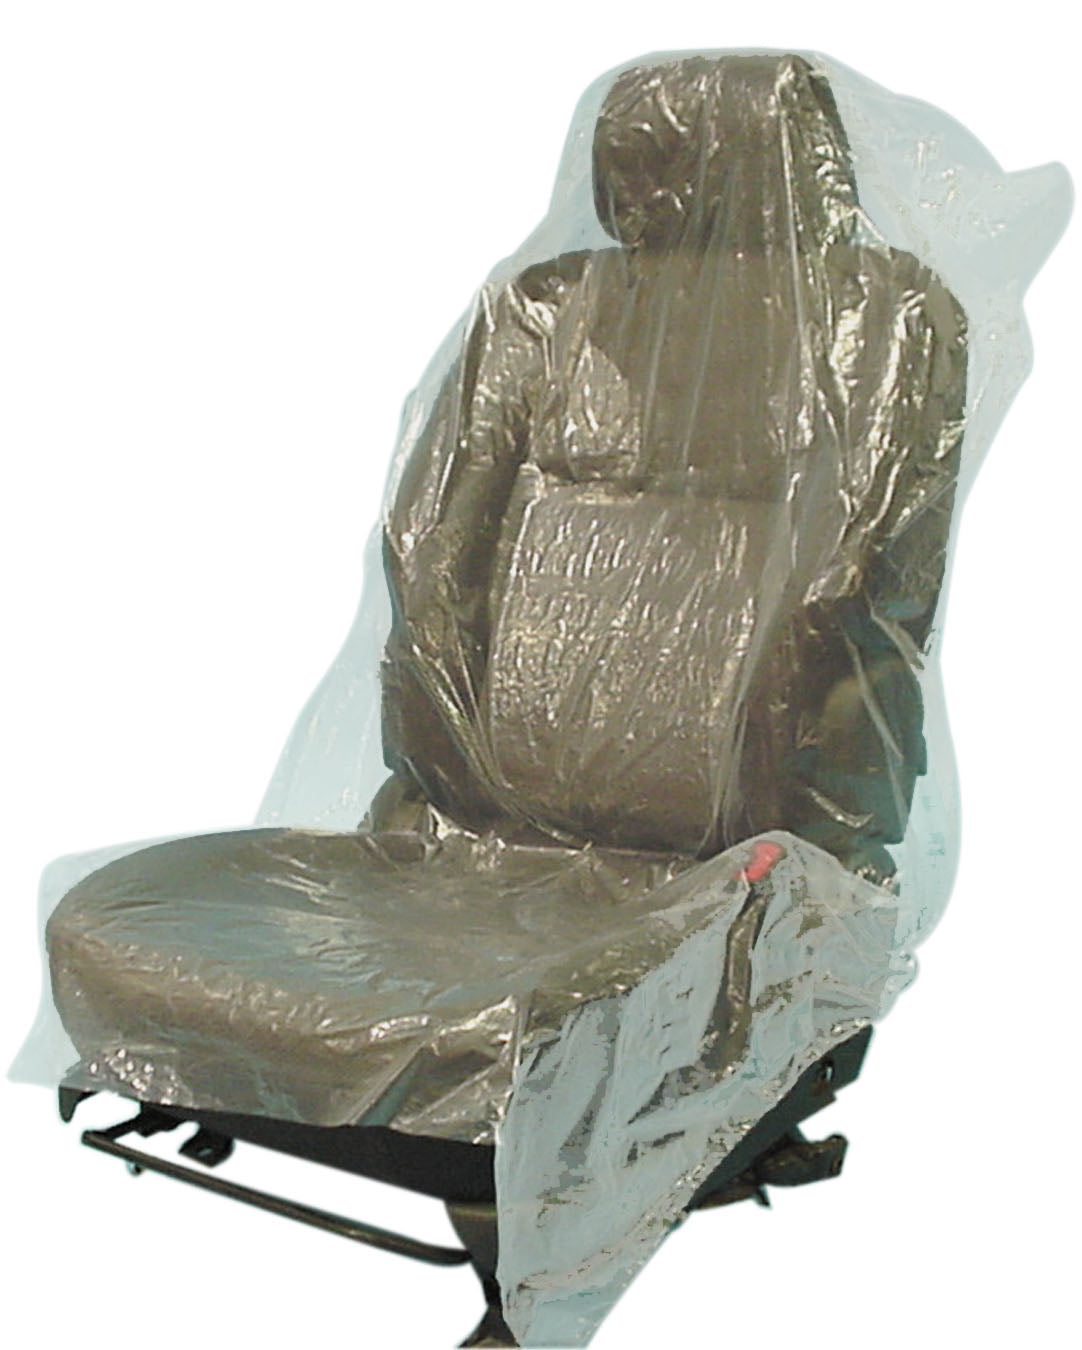 Plastic seat covers - Box of 200